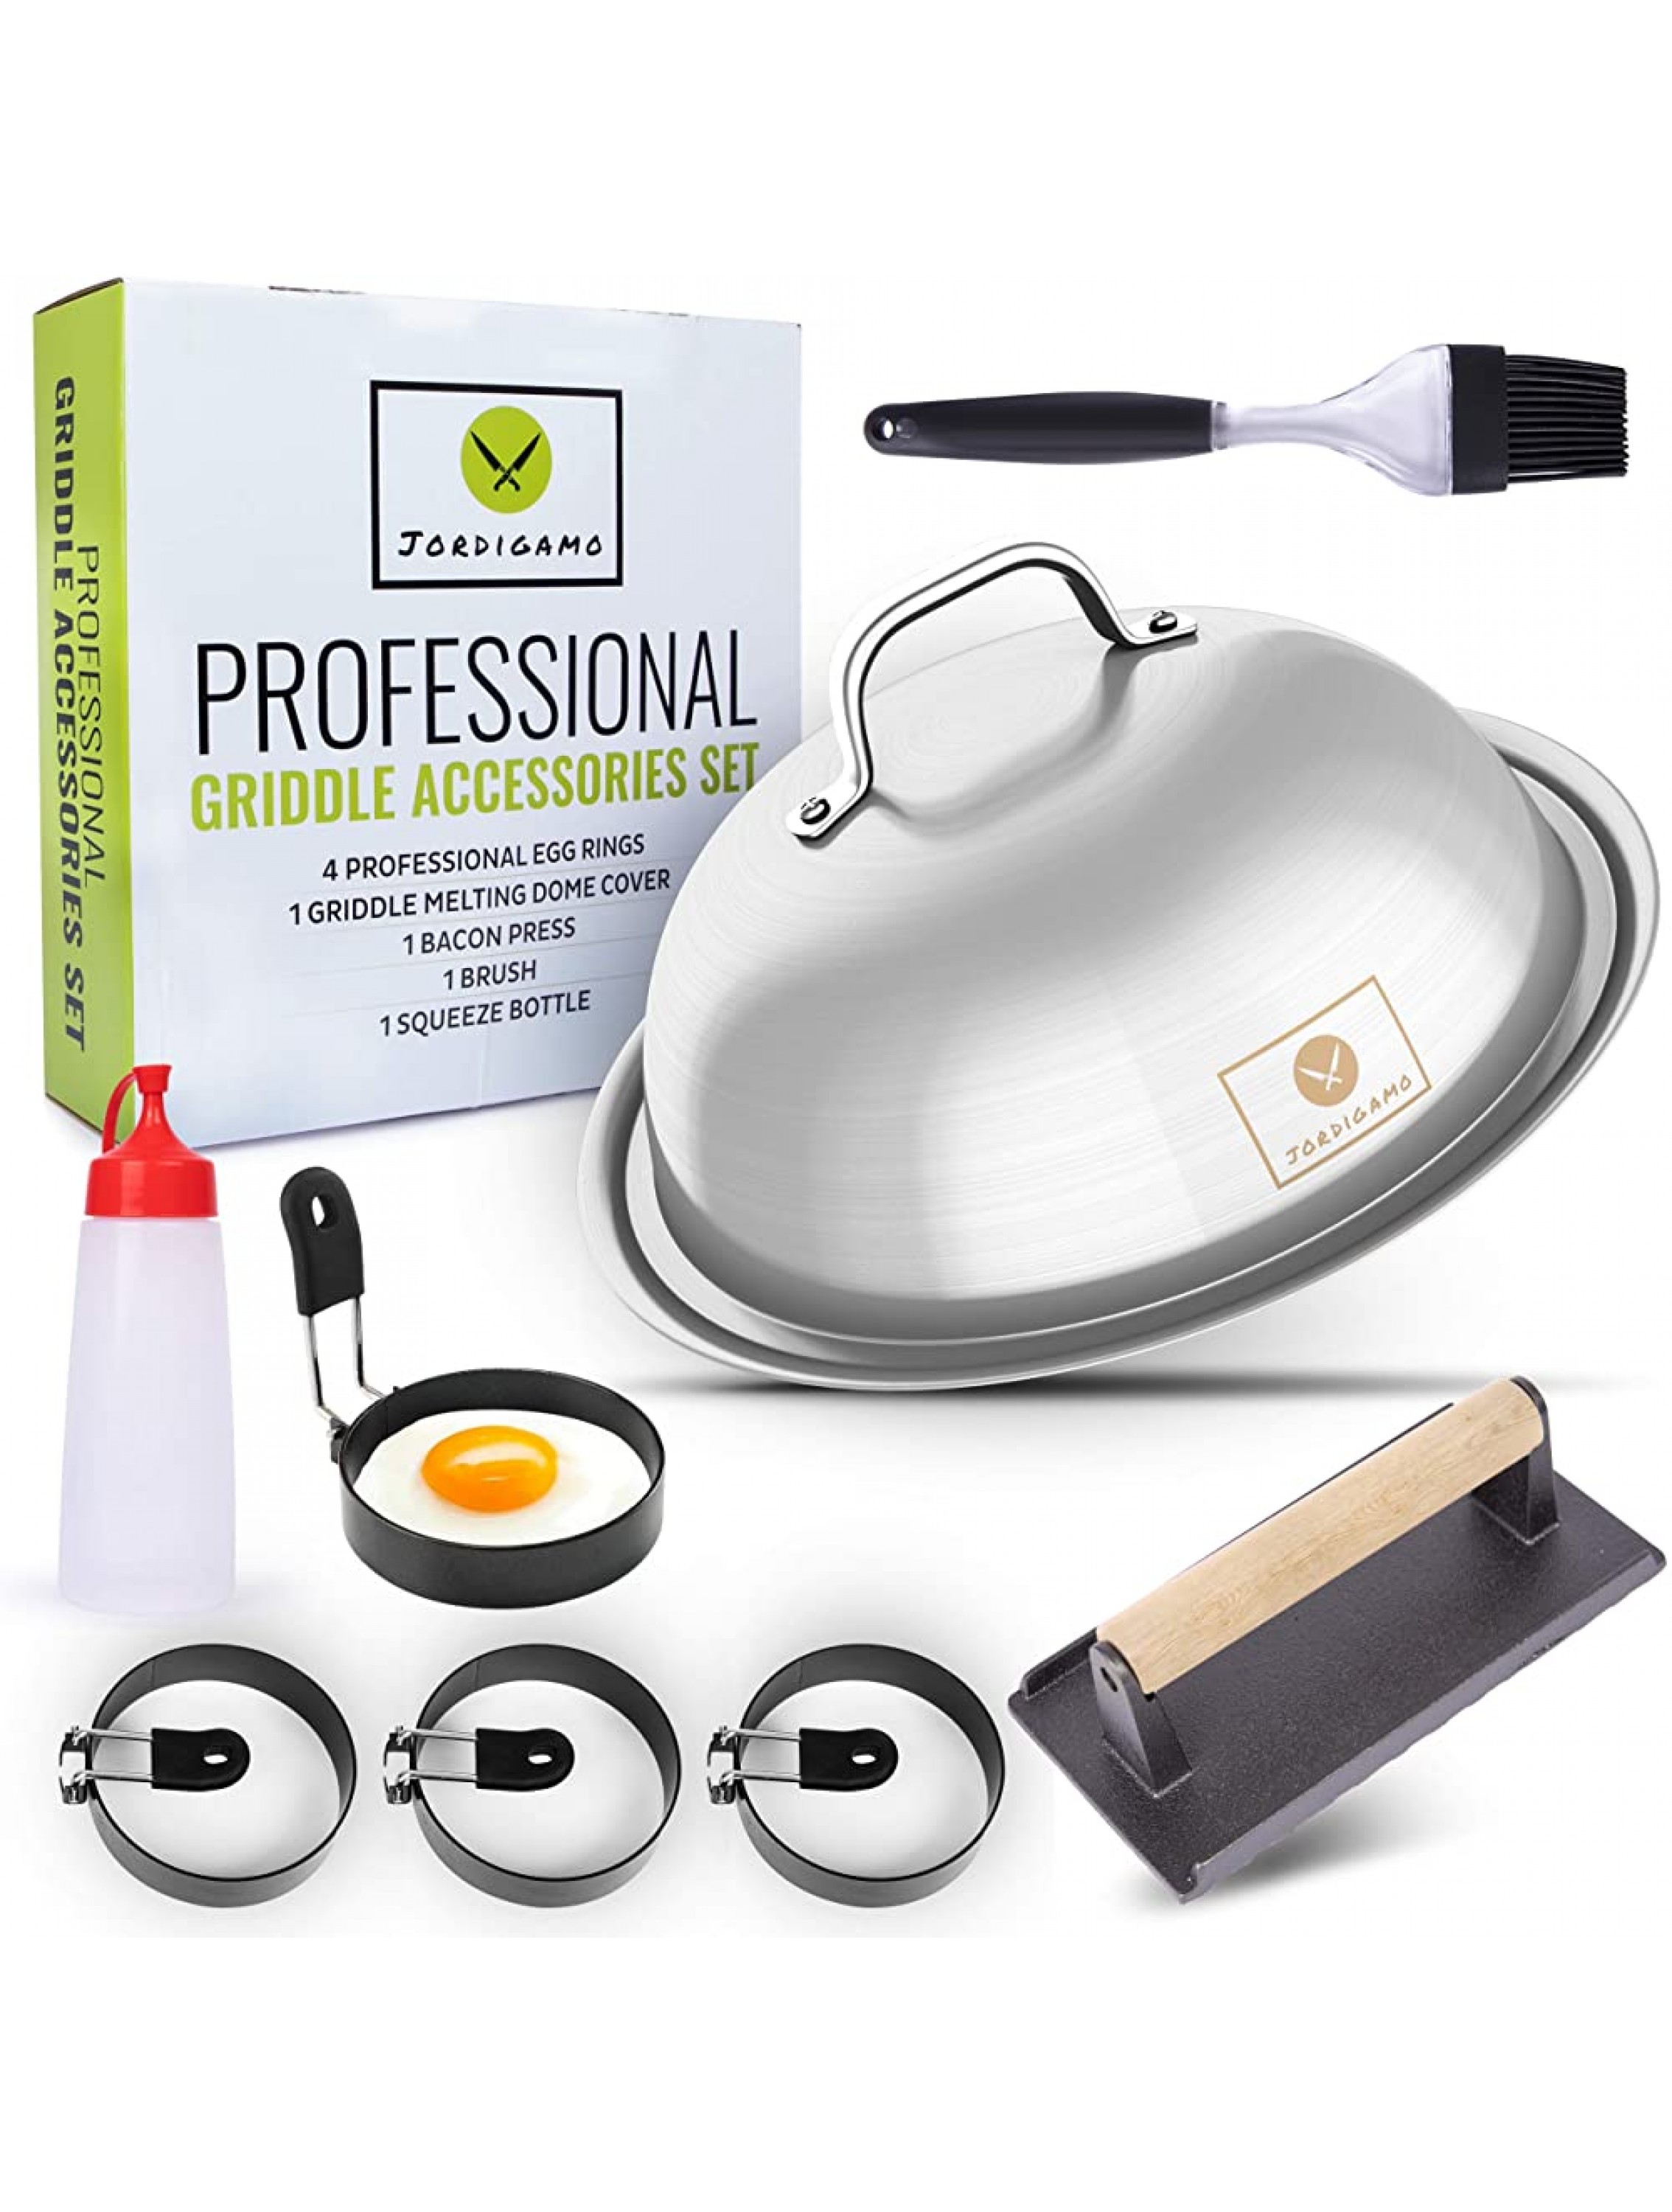 JORDIGAMO Griddle Accessories Kit 8 Flat Top Grill Accessories Set for Blackstone & Camp Chef Hibachi BBQ Tools 12″ Cheese Melting Griddle Dome Cover Set Bacon Press 4 Egg Rings Brush & Bottle - BPU7F5EQ6